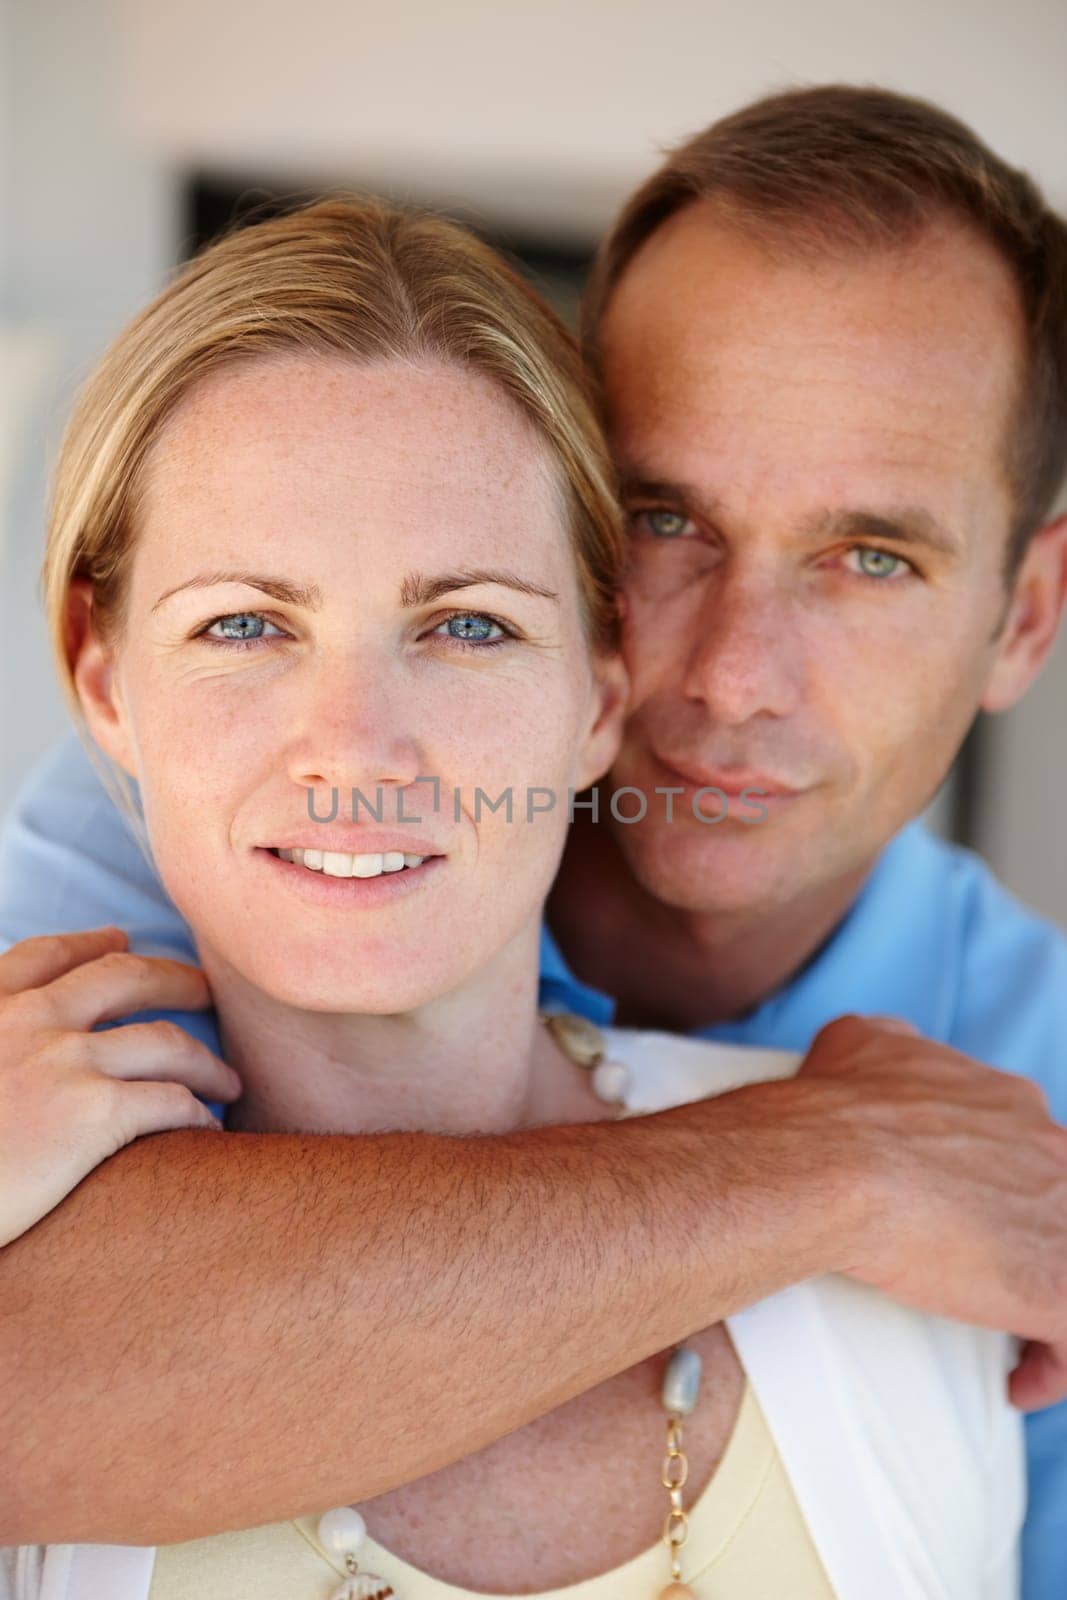 Home, portrait and couple in hug for care, love and proud of marriage milestone on anniversary. Lounge, embrace and people for relationship achievement, romance and bonding in apartment for support.